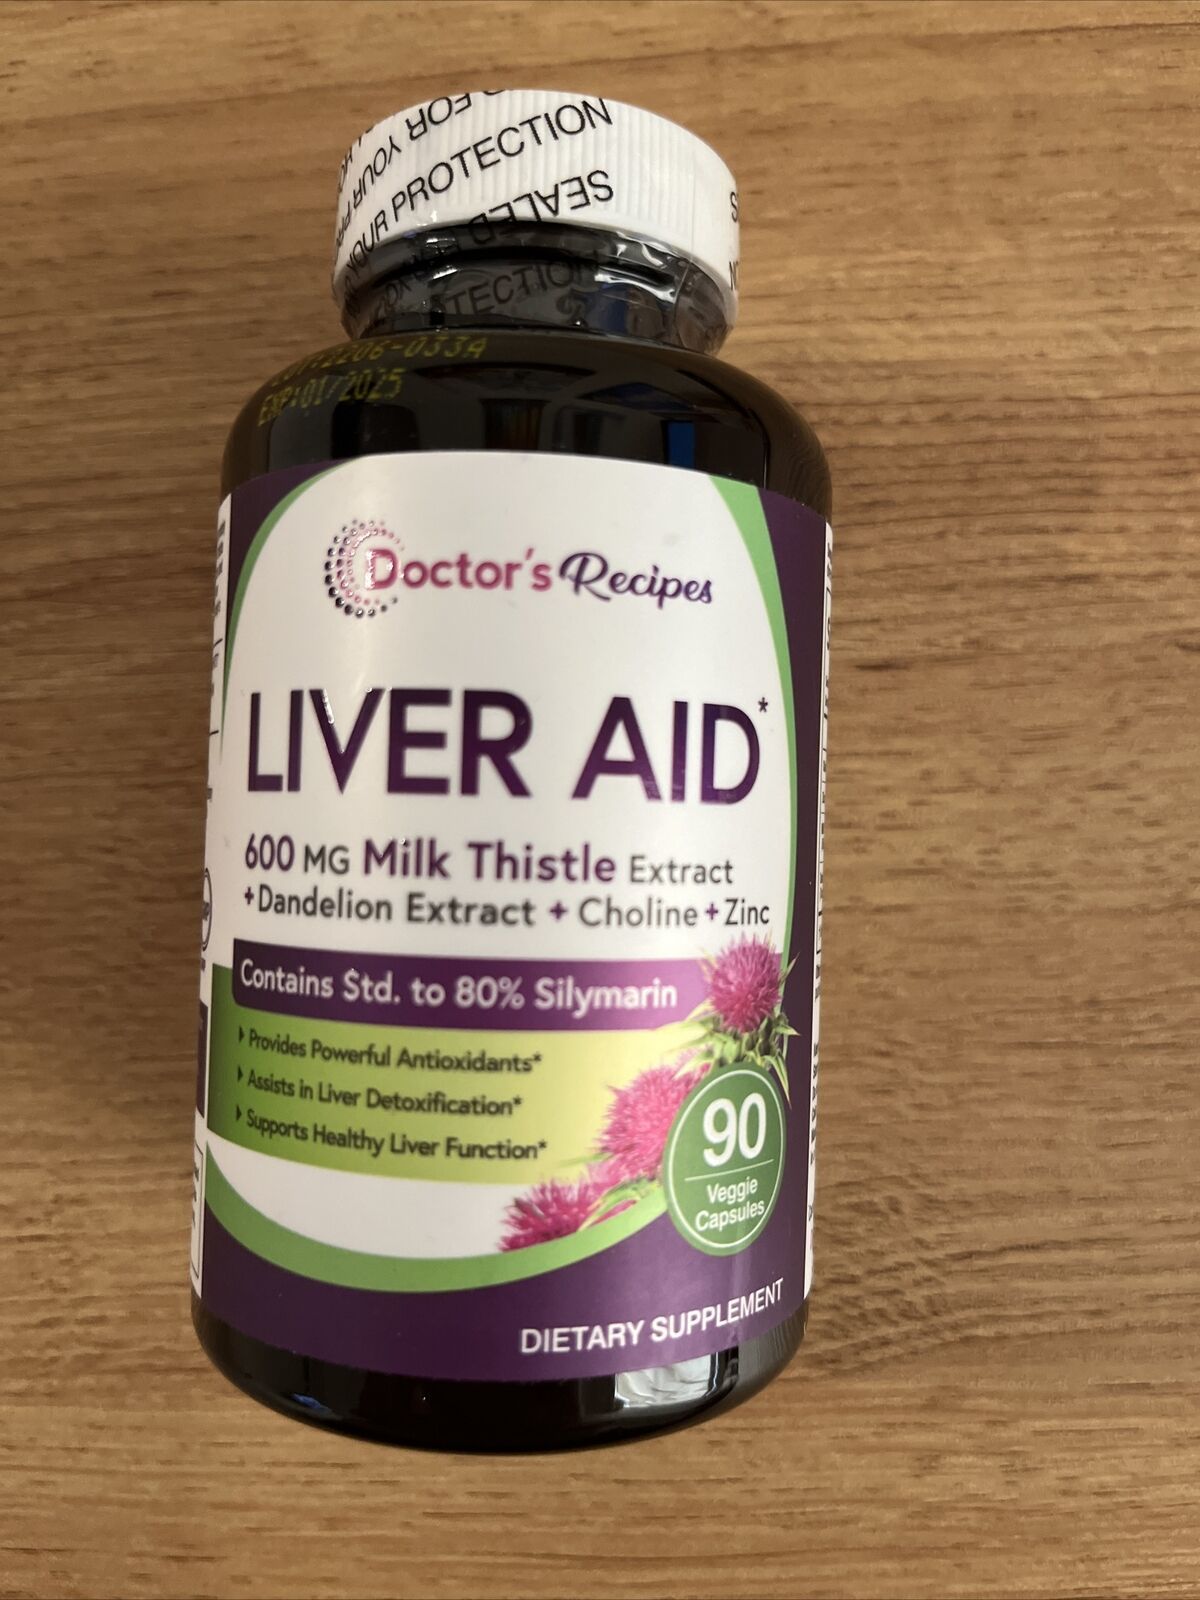 Liver Support Supplement Milk Thistle Extract 600mg 90 Veggie Caps EXP 1/25 NEW - $14.94